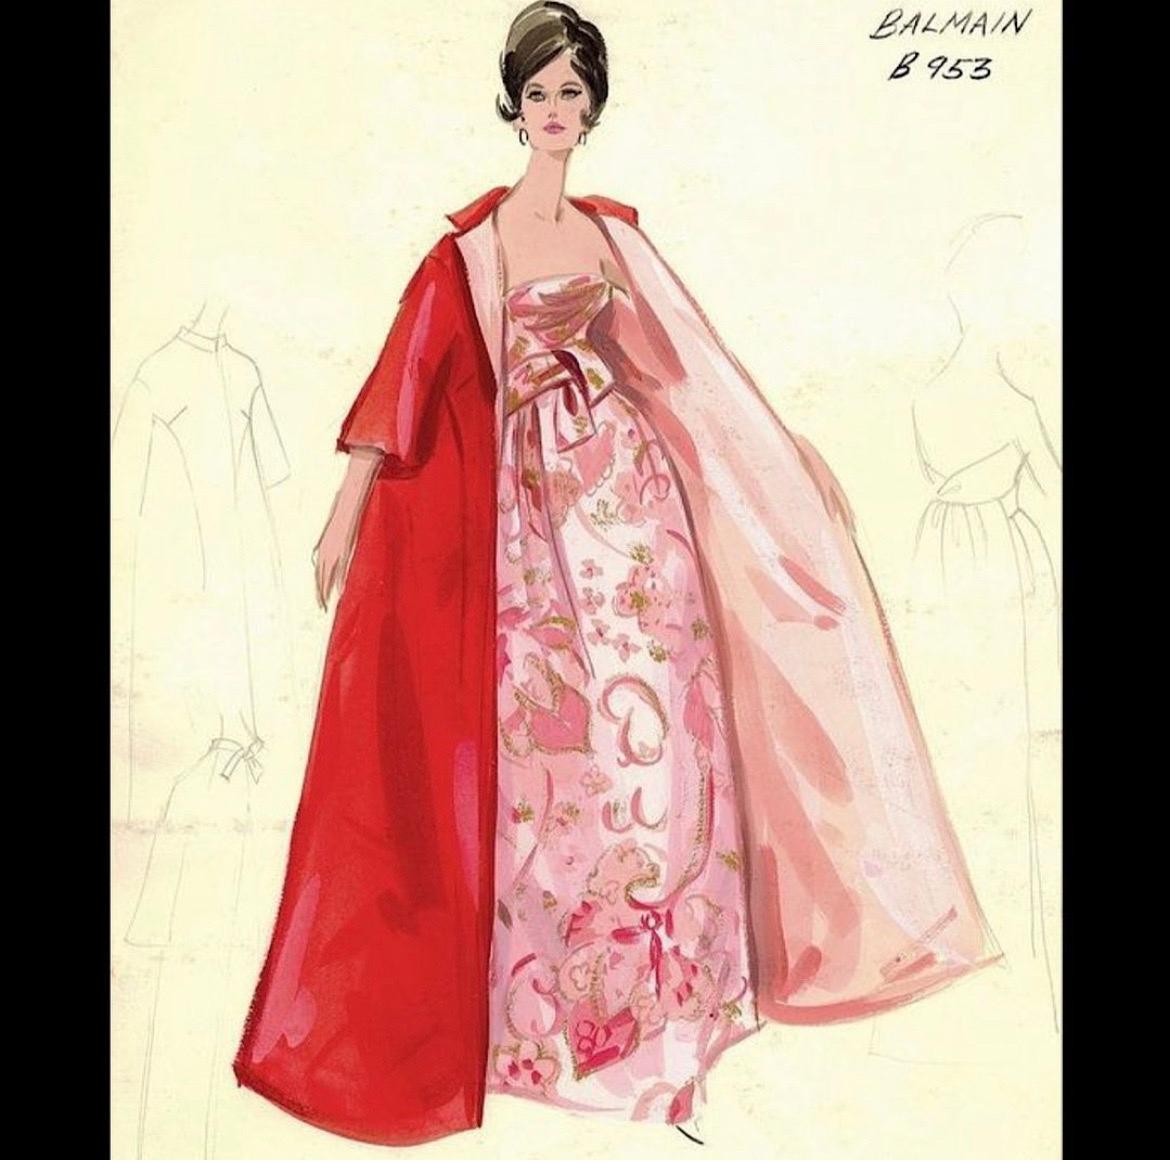 A simply beautiful Pierre Balmain haute couture silk-brocade evening gown dating back to his fall-winter 1963 collection. As shown, we were thrilled to find the original illustration and Bergdorf Goodman client order label. Pierre Balmain worked